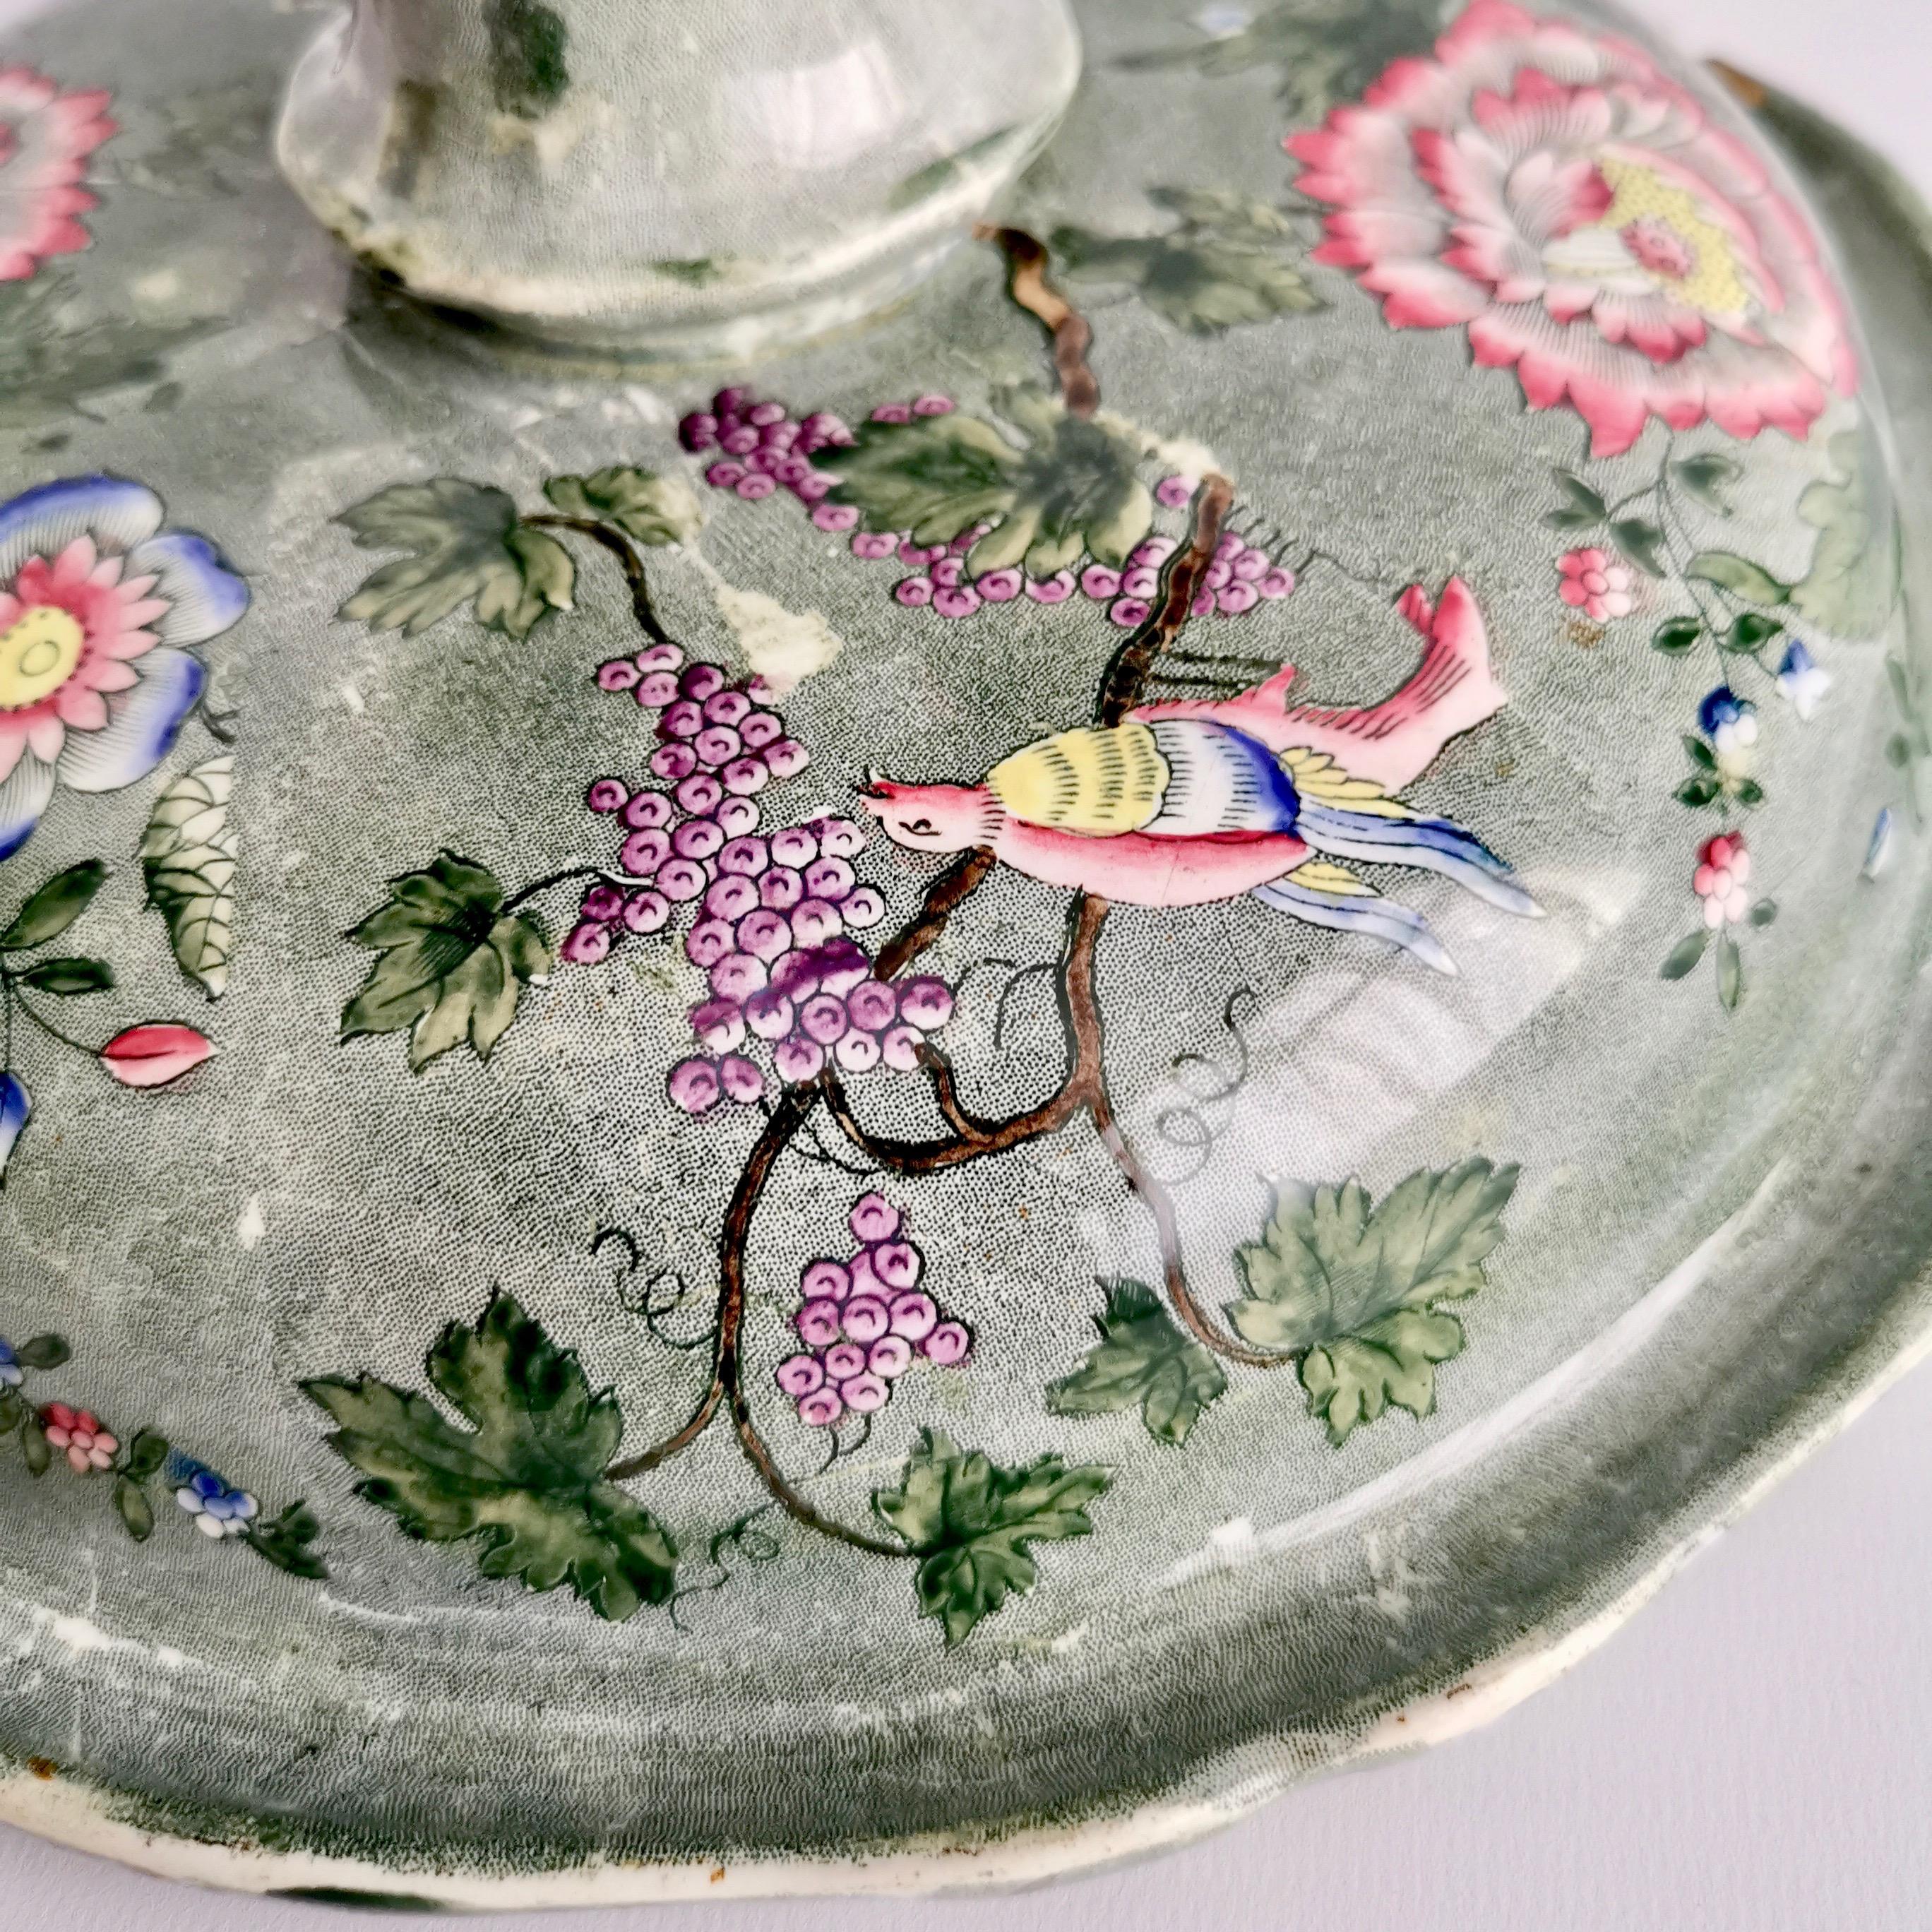 Spode's New Fayence Tazza, Green Chinoiserie Flowers and Birds, Regency, 1829 3